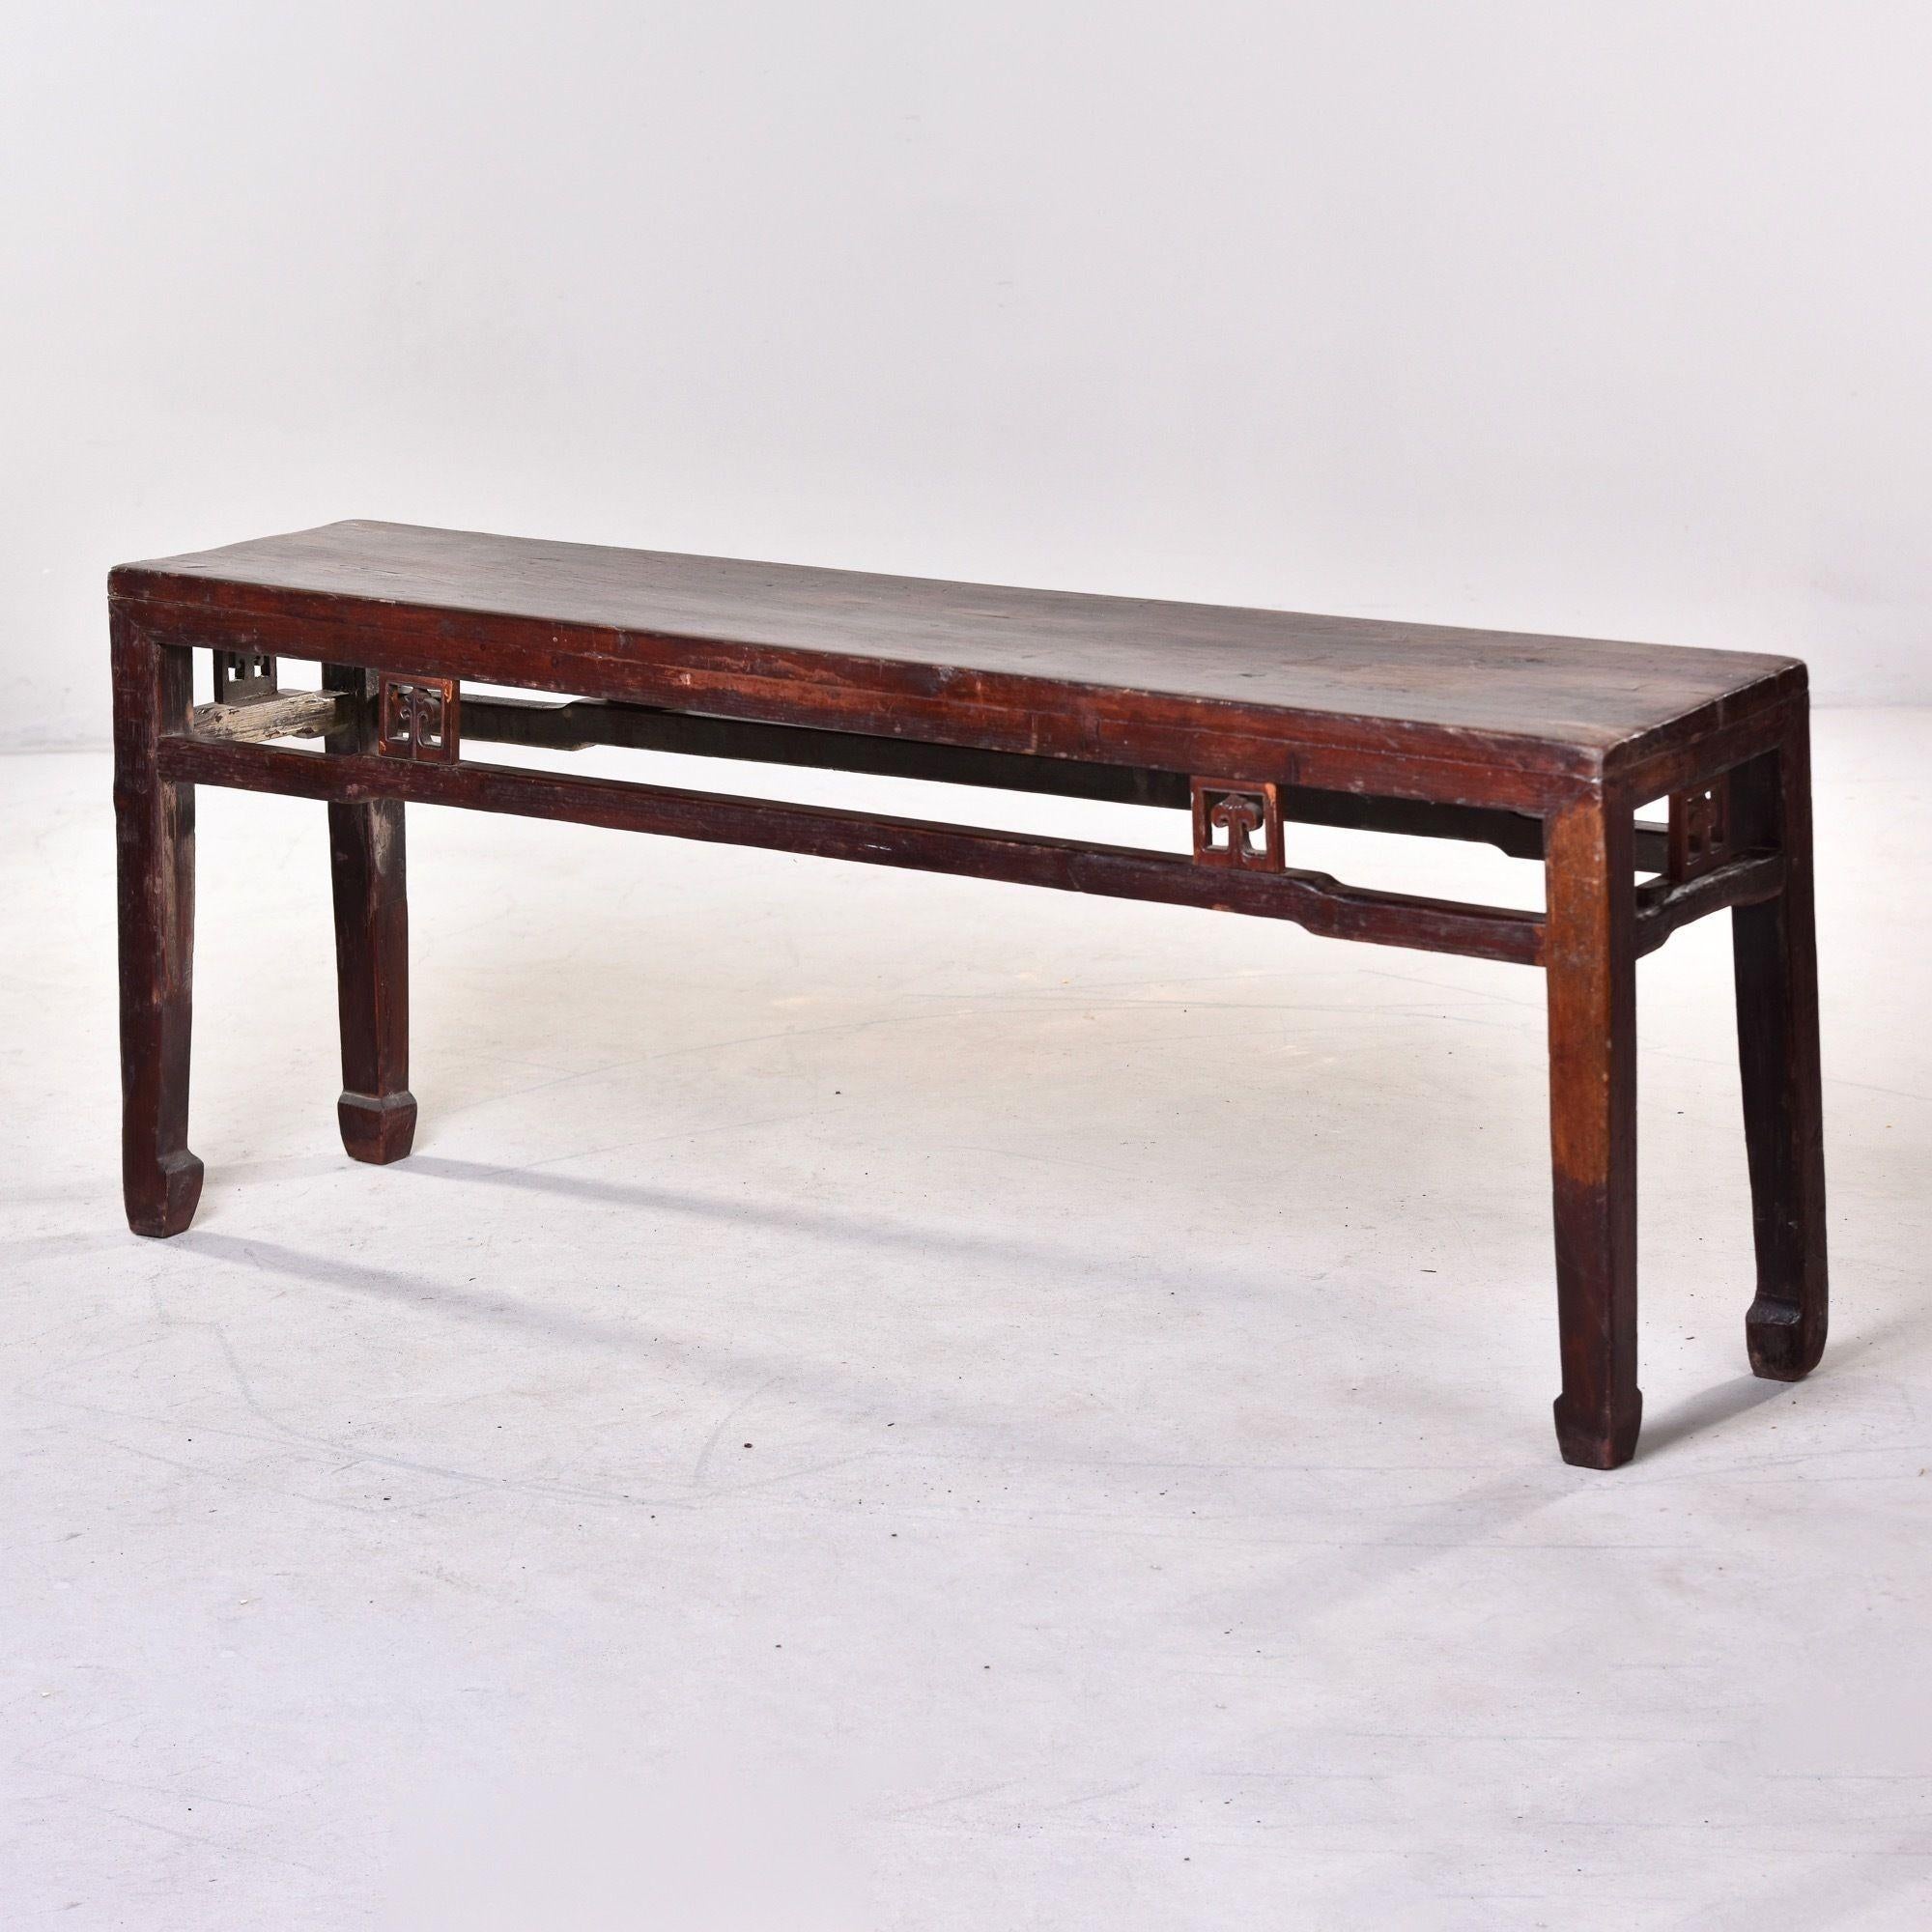 Early 20th C Extra Long Chinese Elm Wood Dong Yang Bench 2